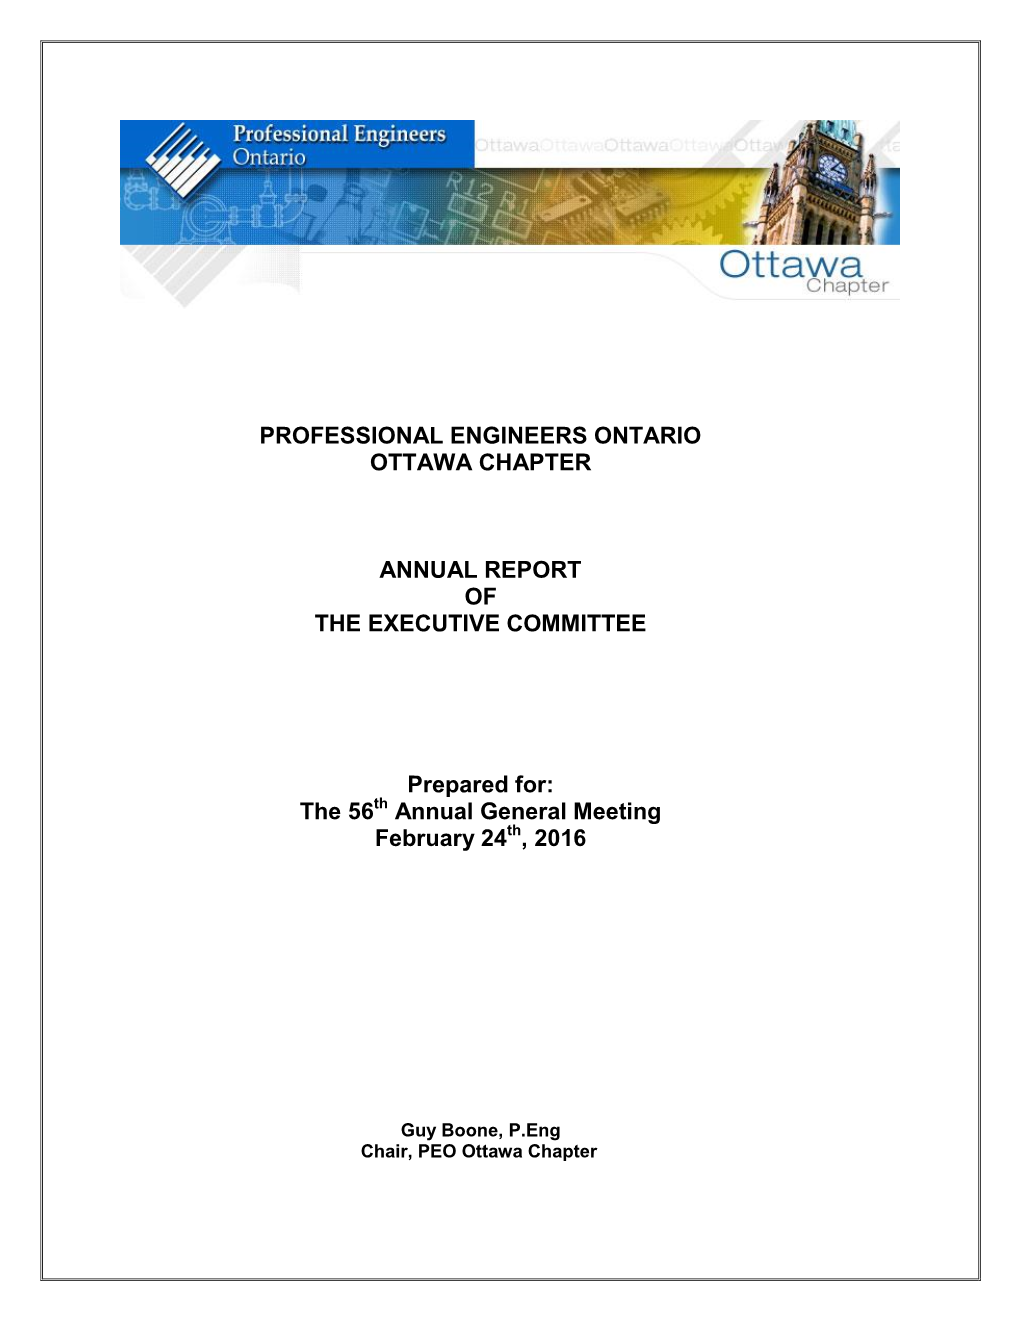 PROFESSIONAL ENGINEERS ONTARIO OTTAWA CHAPTER ANNUAL REPORT of the EXECUTIVE COMMITTEE Prepared